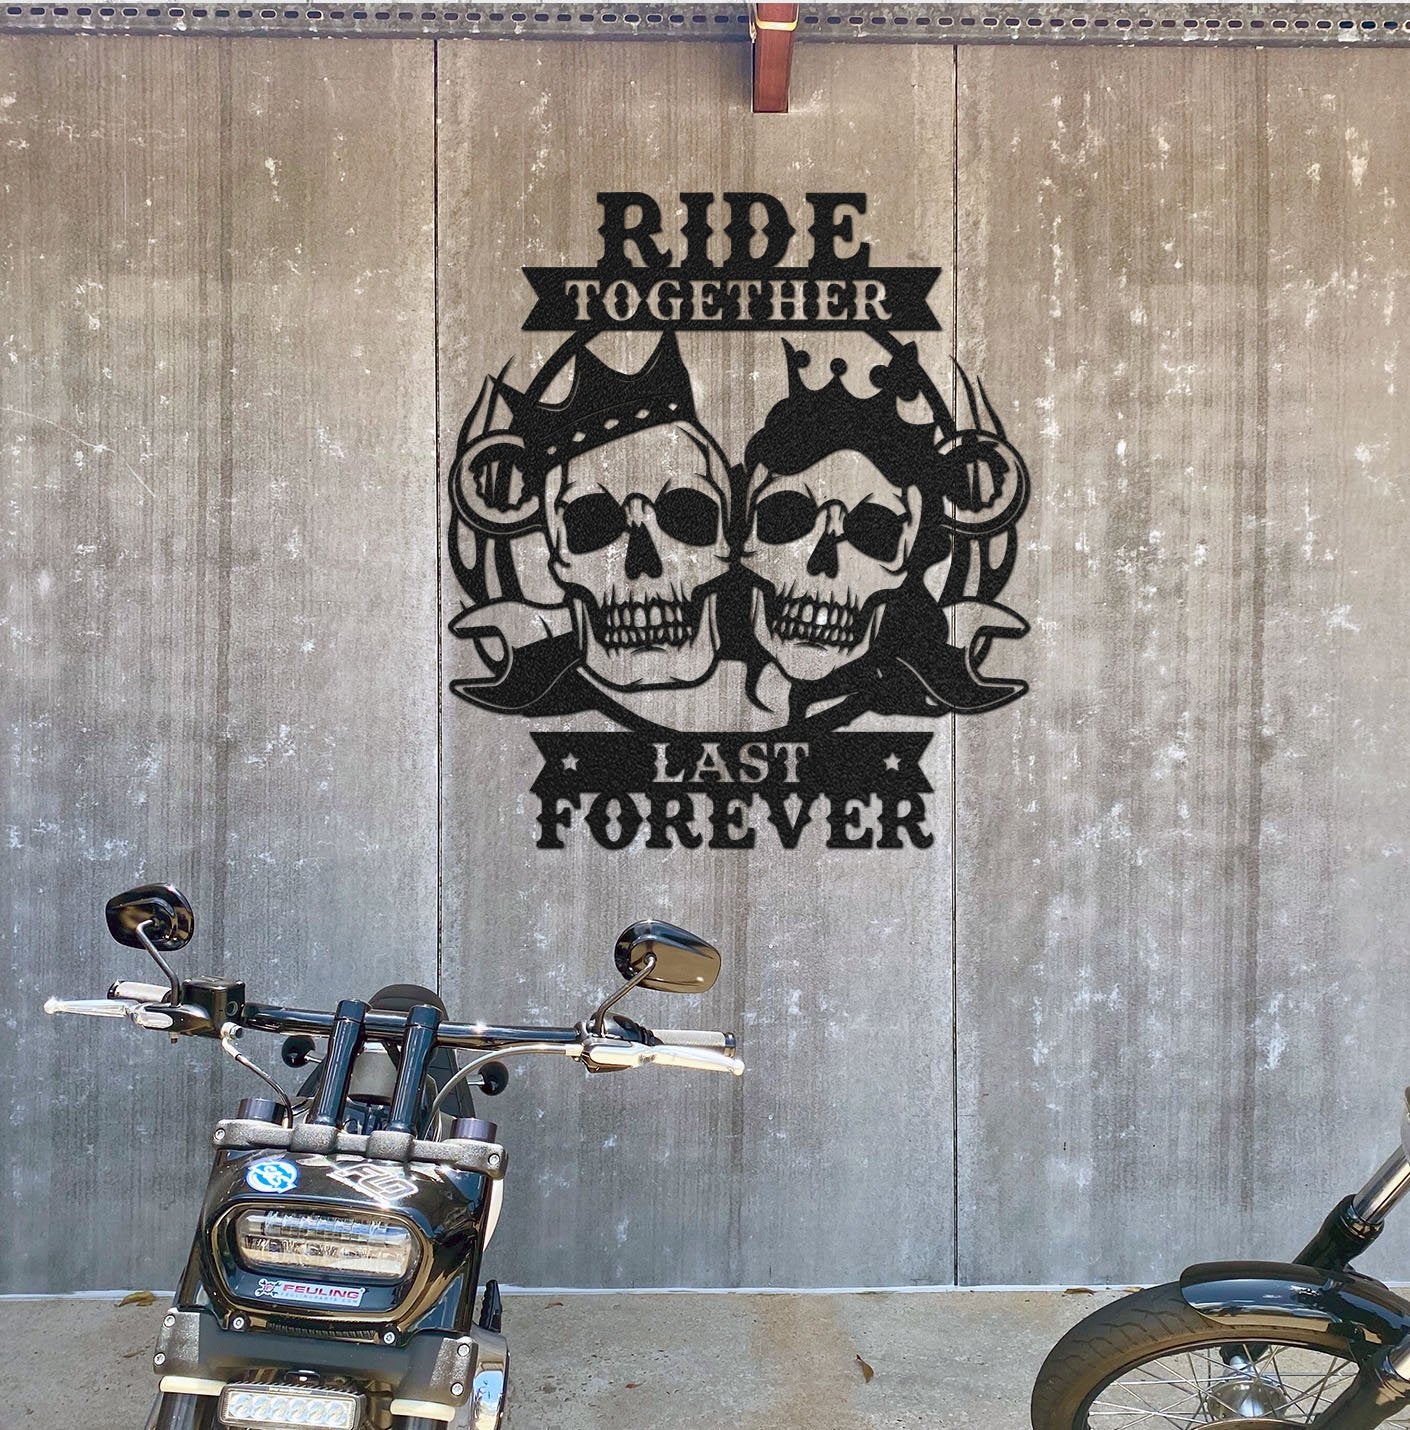 Ride Together Last Forever Metal Wall Art (🇺🇸Made In The USA)